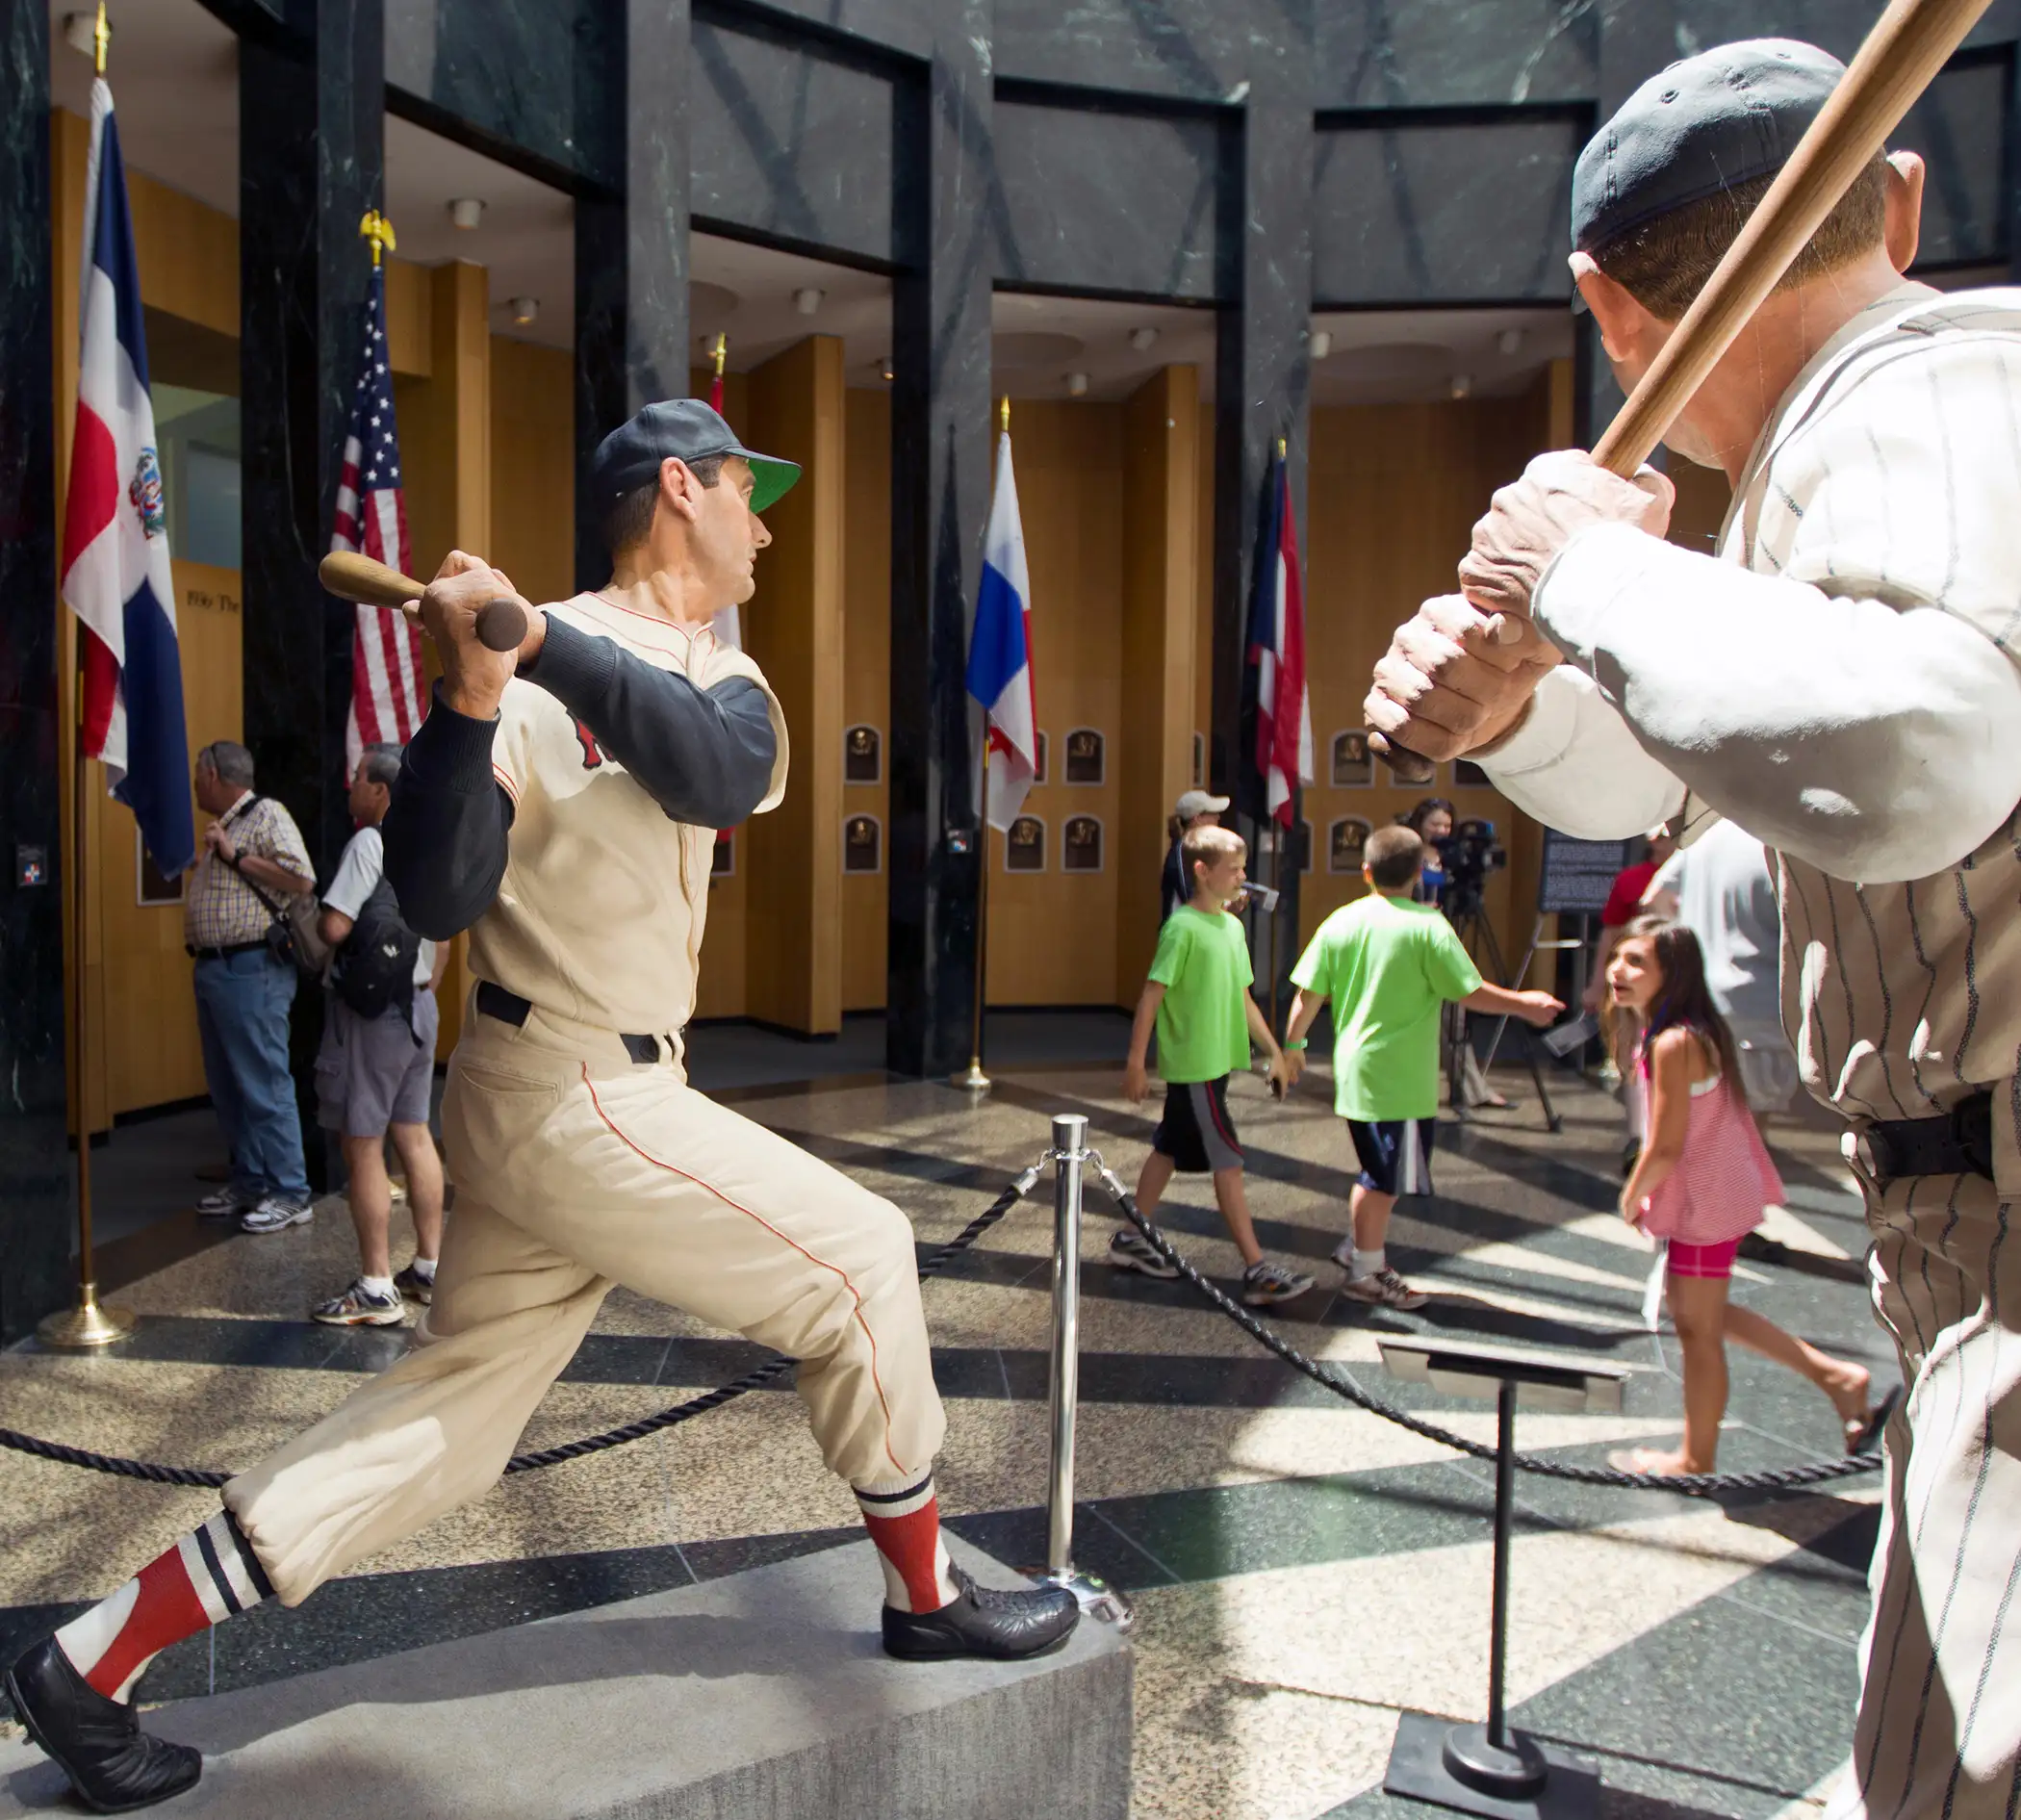 Baseball fans at the National Baseball Hall of Fame and Museum in Cooperstown, New York, 2014.